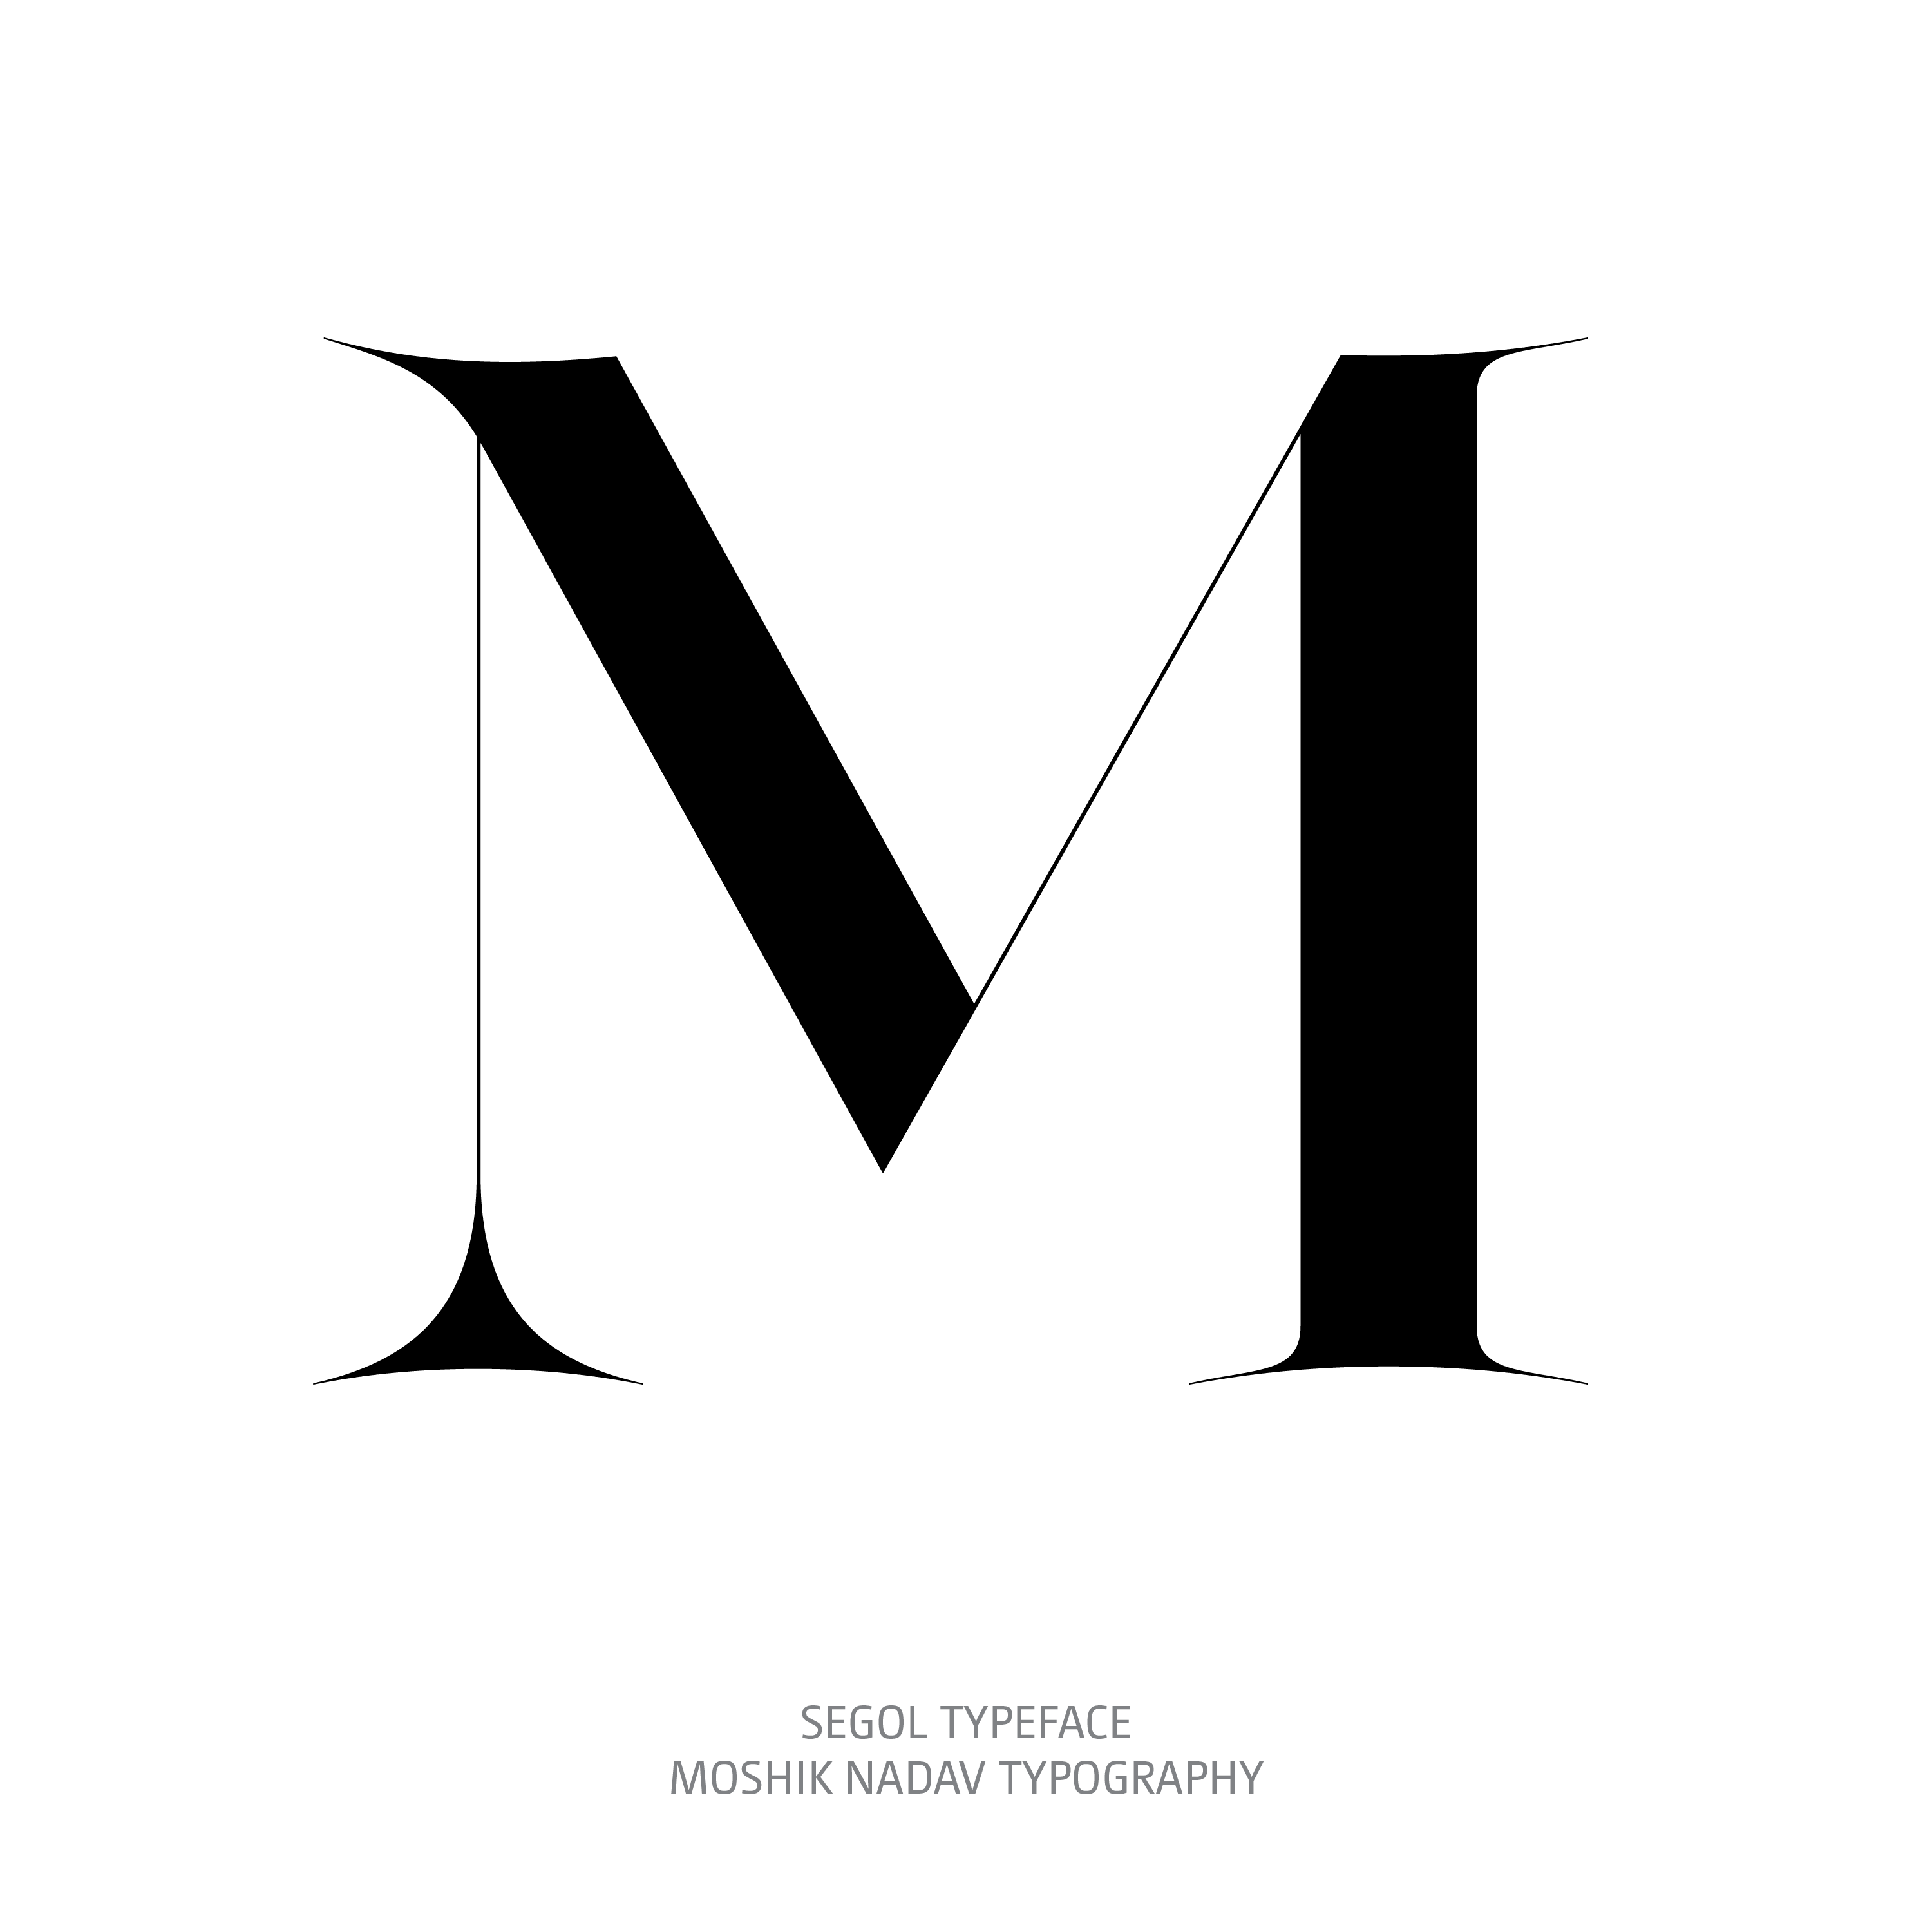 Segol Typeface M The Ultimate Font For Fashion Typography and sexy logos